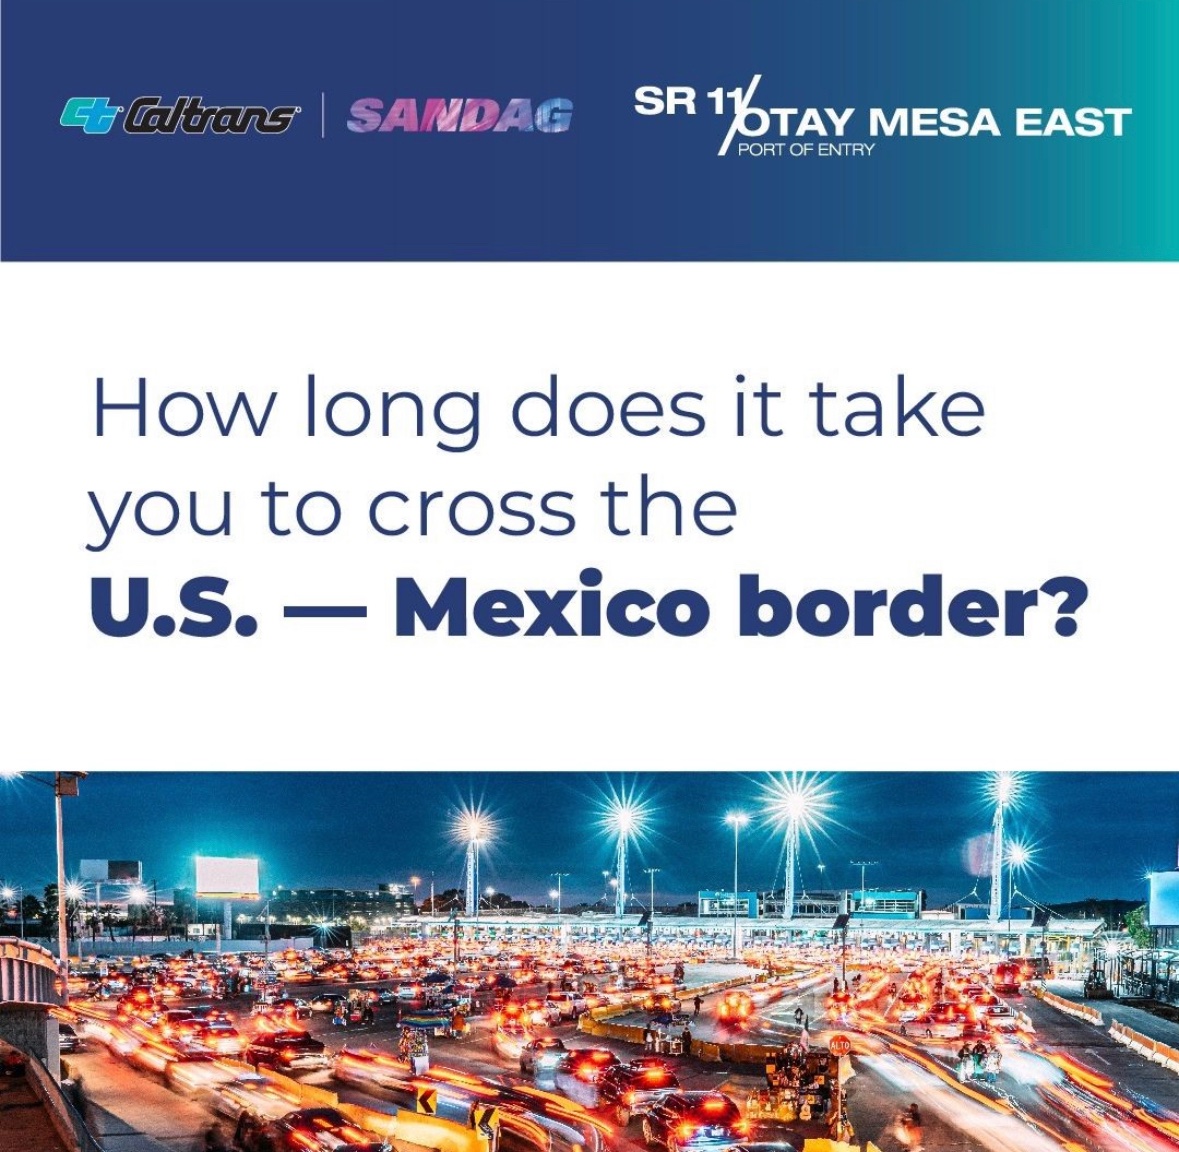 Do you frequently cross the border through San Ysidro or Otay Mesa? 🚗 @SDCaltrans and @SANDAG are conducting a new Border Wait Time Survey and want to hear from you! Take their survey to enter a raffle for a $50 giveaway opportunity. 🔗 bit.ly/BorderWaitTime…